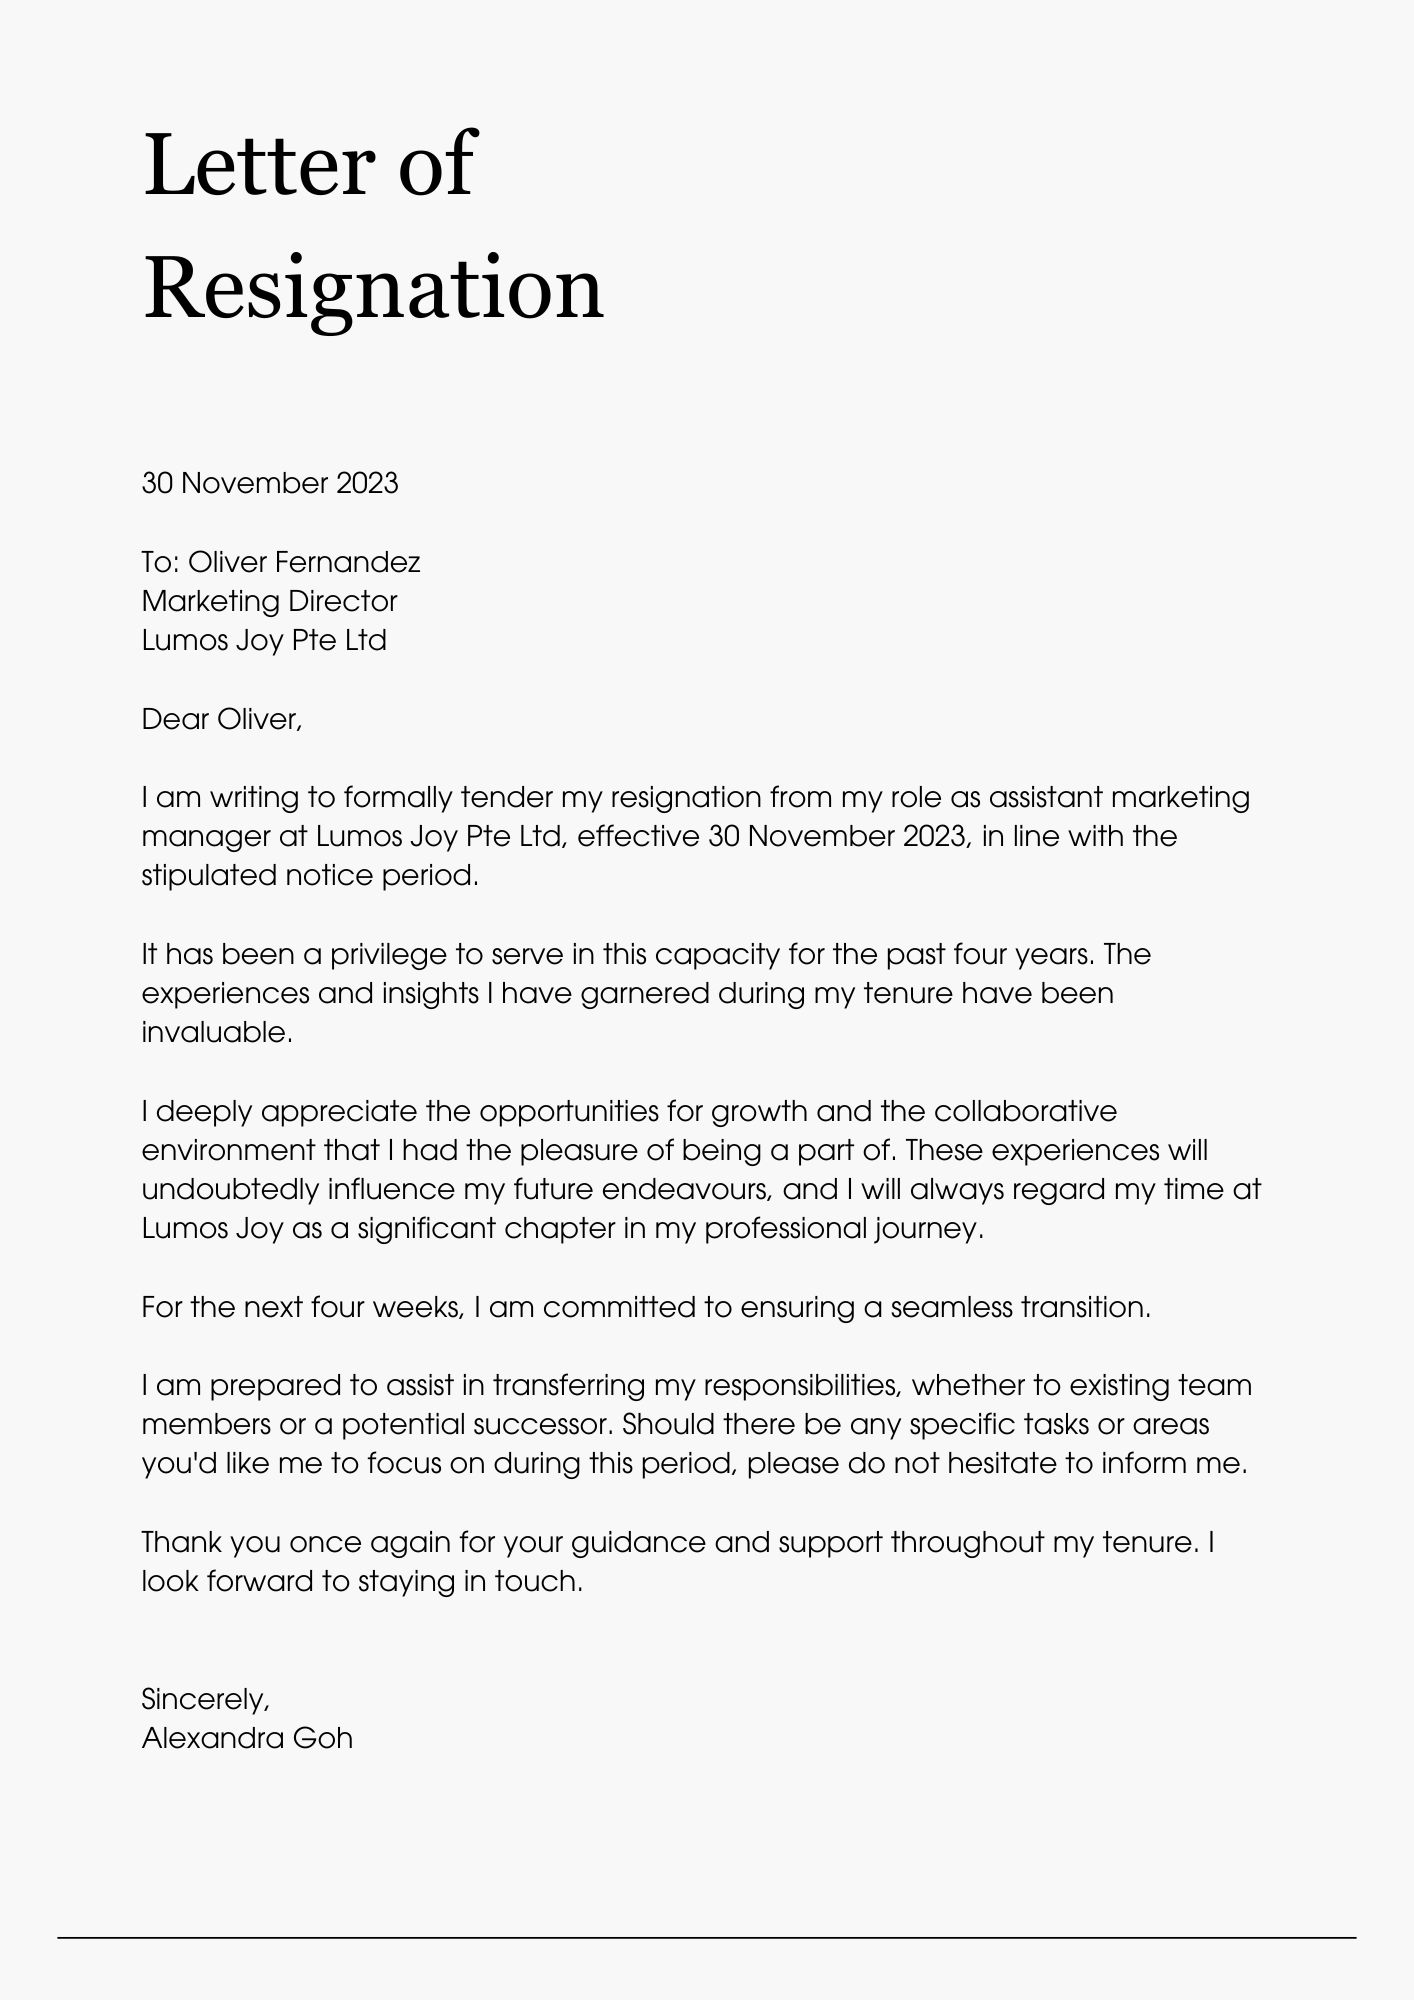 Here is an example of how a resignation letter would look like